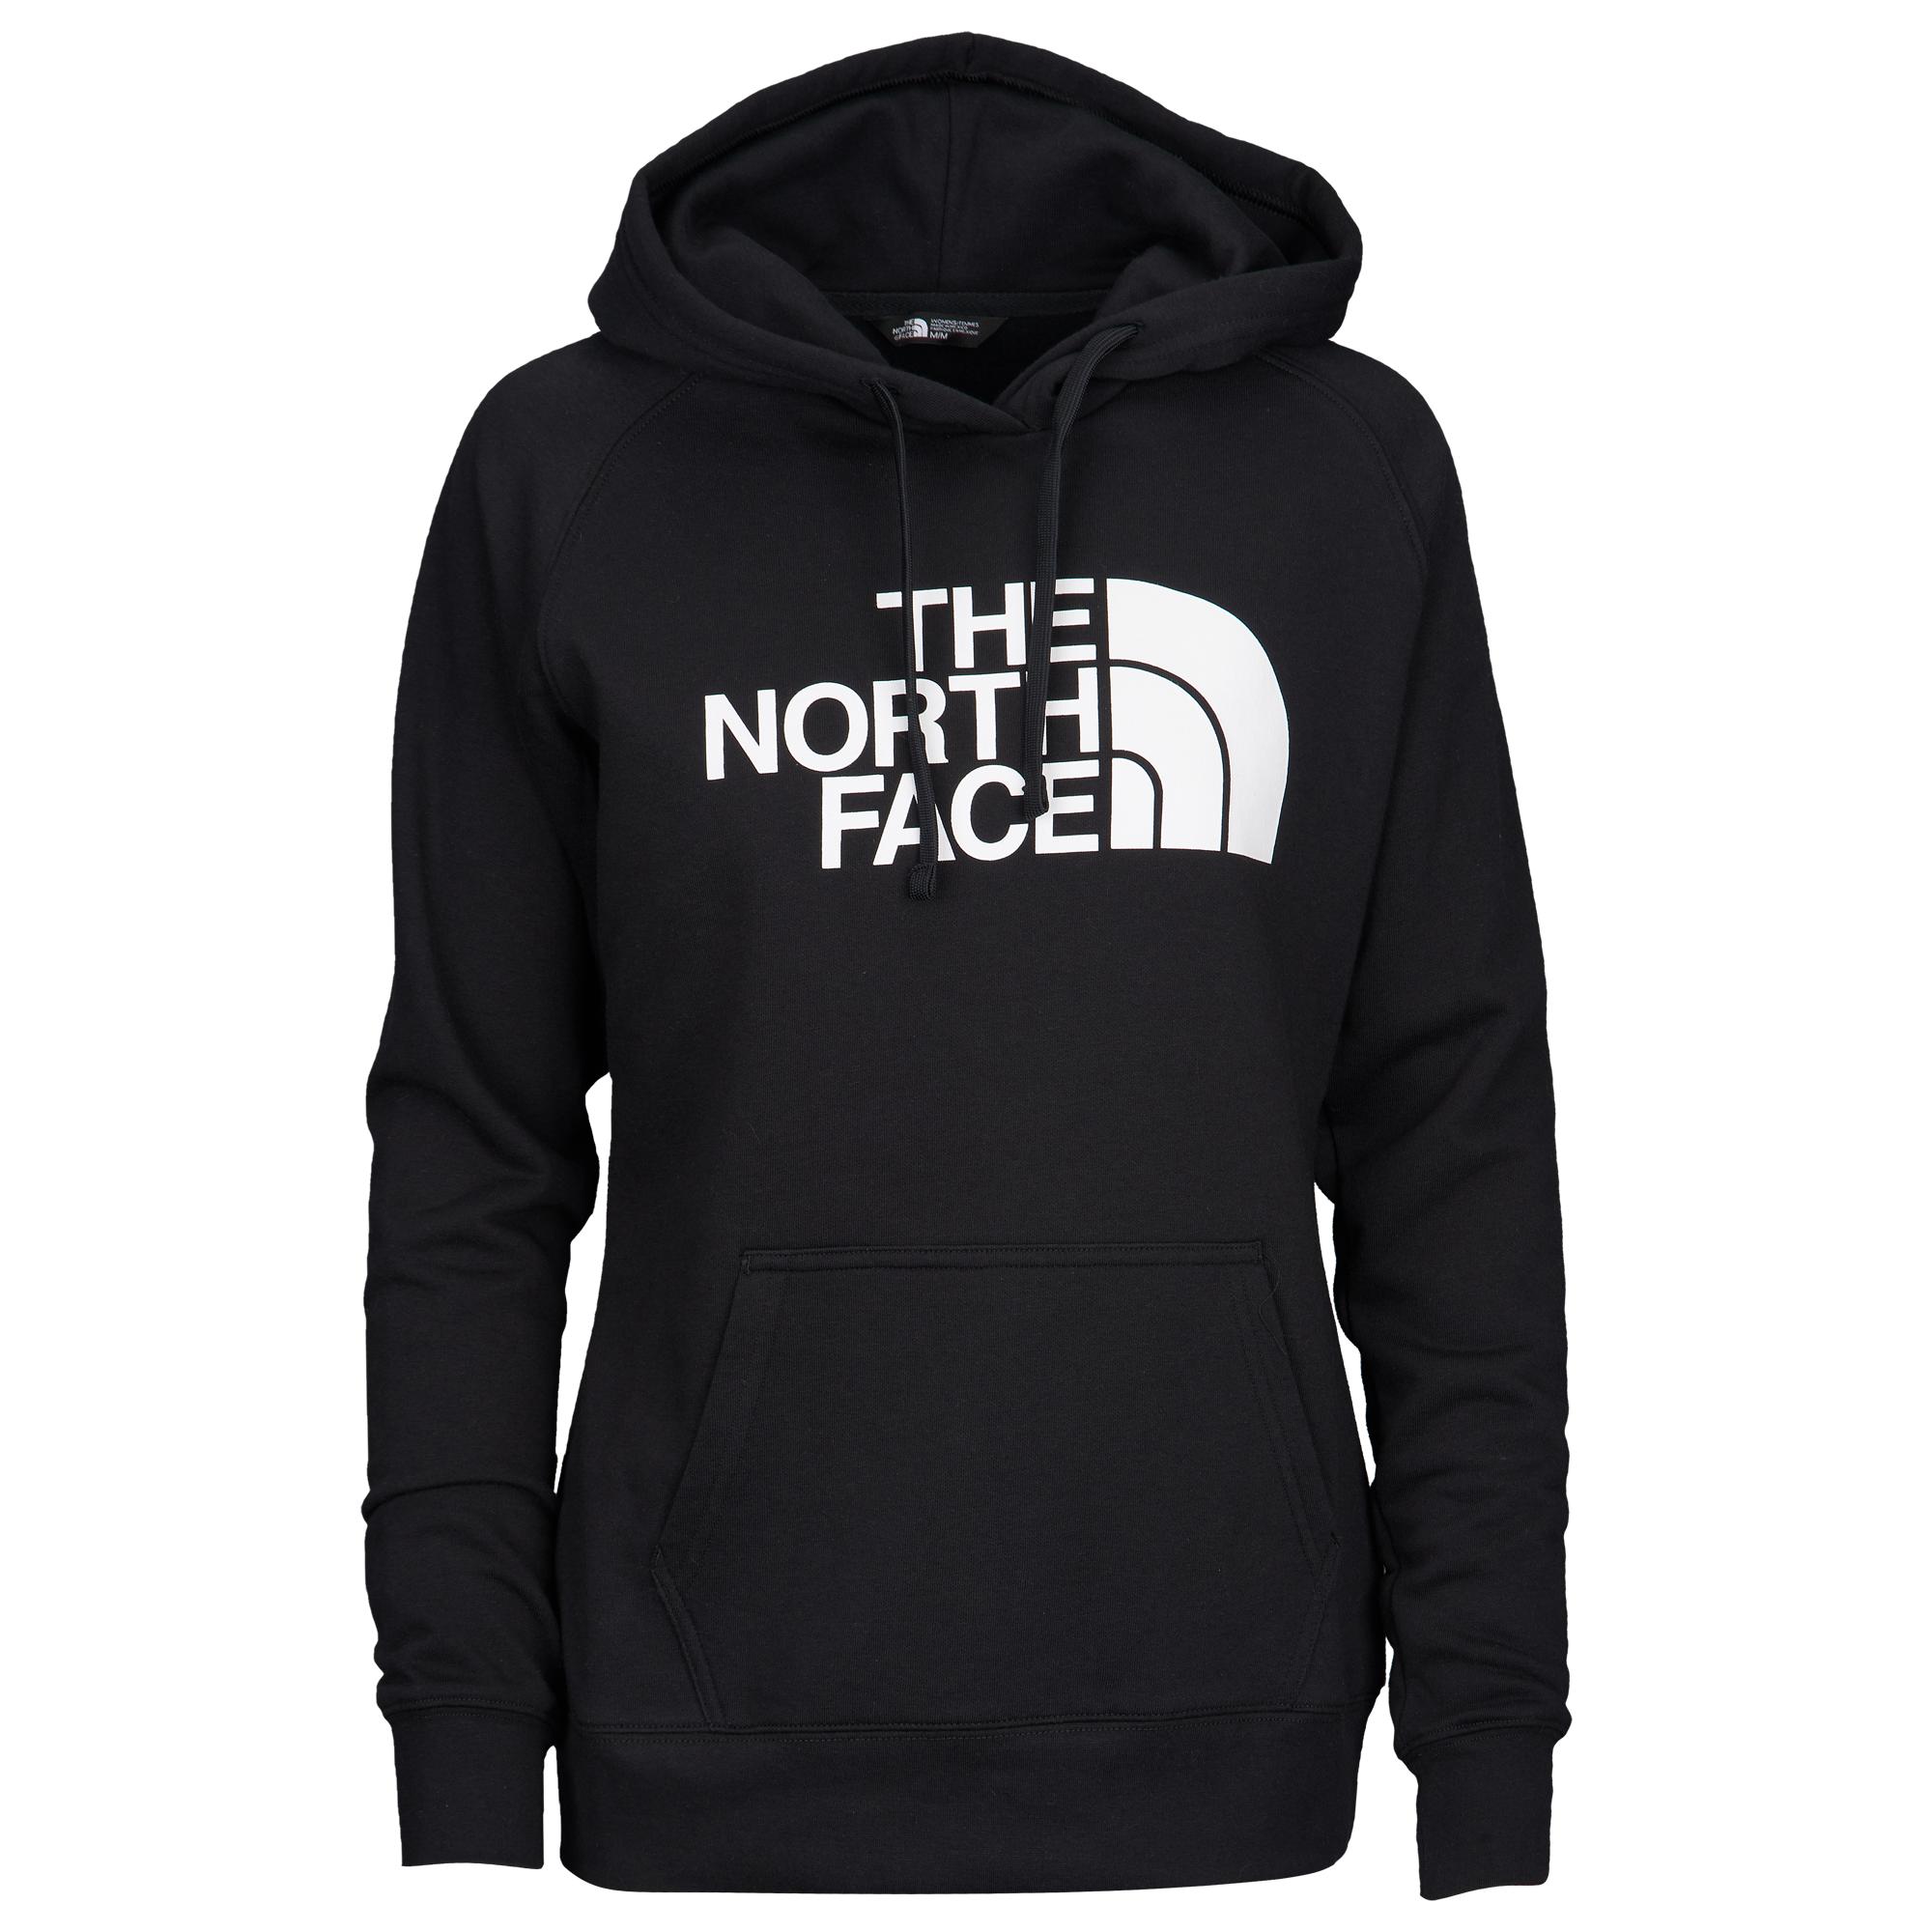 The North Face Half Dome Pullover Hoodie in Black - Save 20% - Lyst